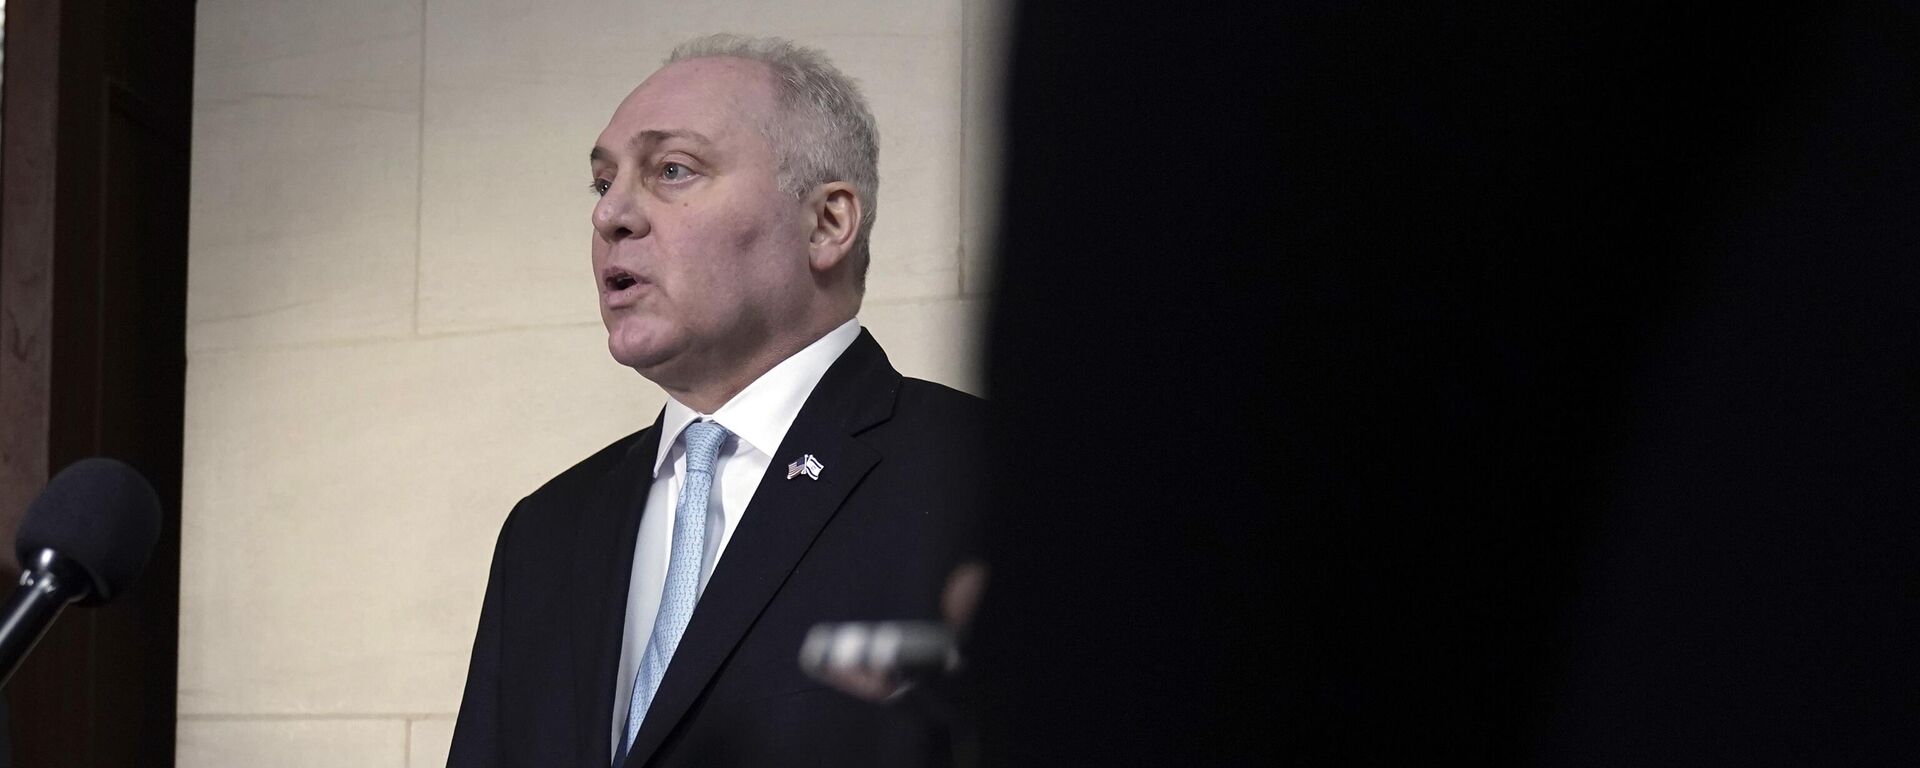 Majority Leader Steve Scalise, R-La., speaks to reporters after a closed-door meeting of House Republicans during which he was nominated as their candidate for Speaker of the House, on Capitol Hill, Wednesday, Oct. 11, 2023 in Washington.  - Sputnik International, 1920, 11.10.2023